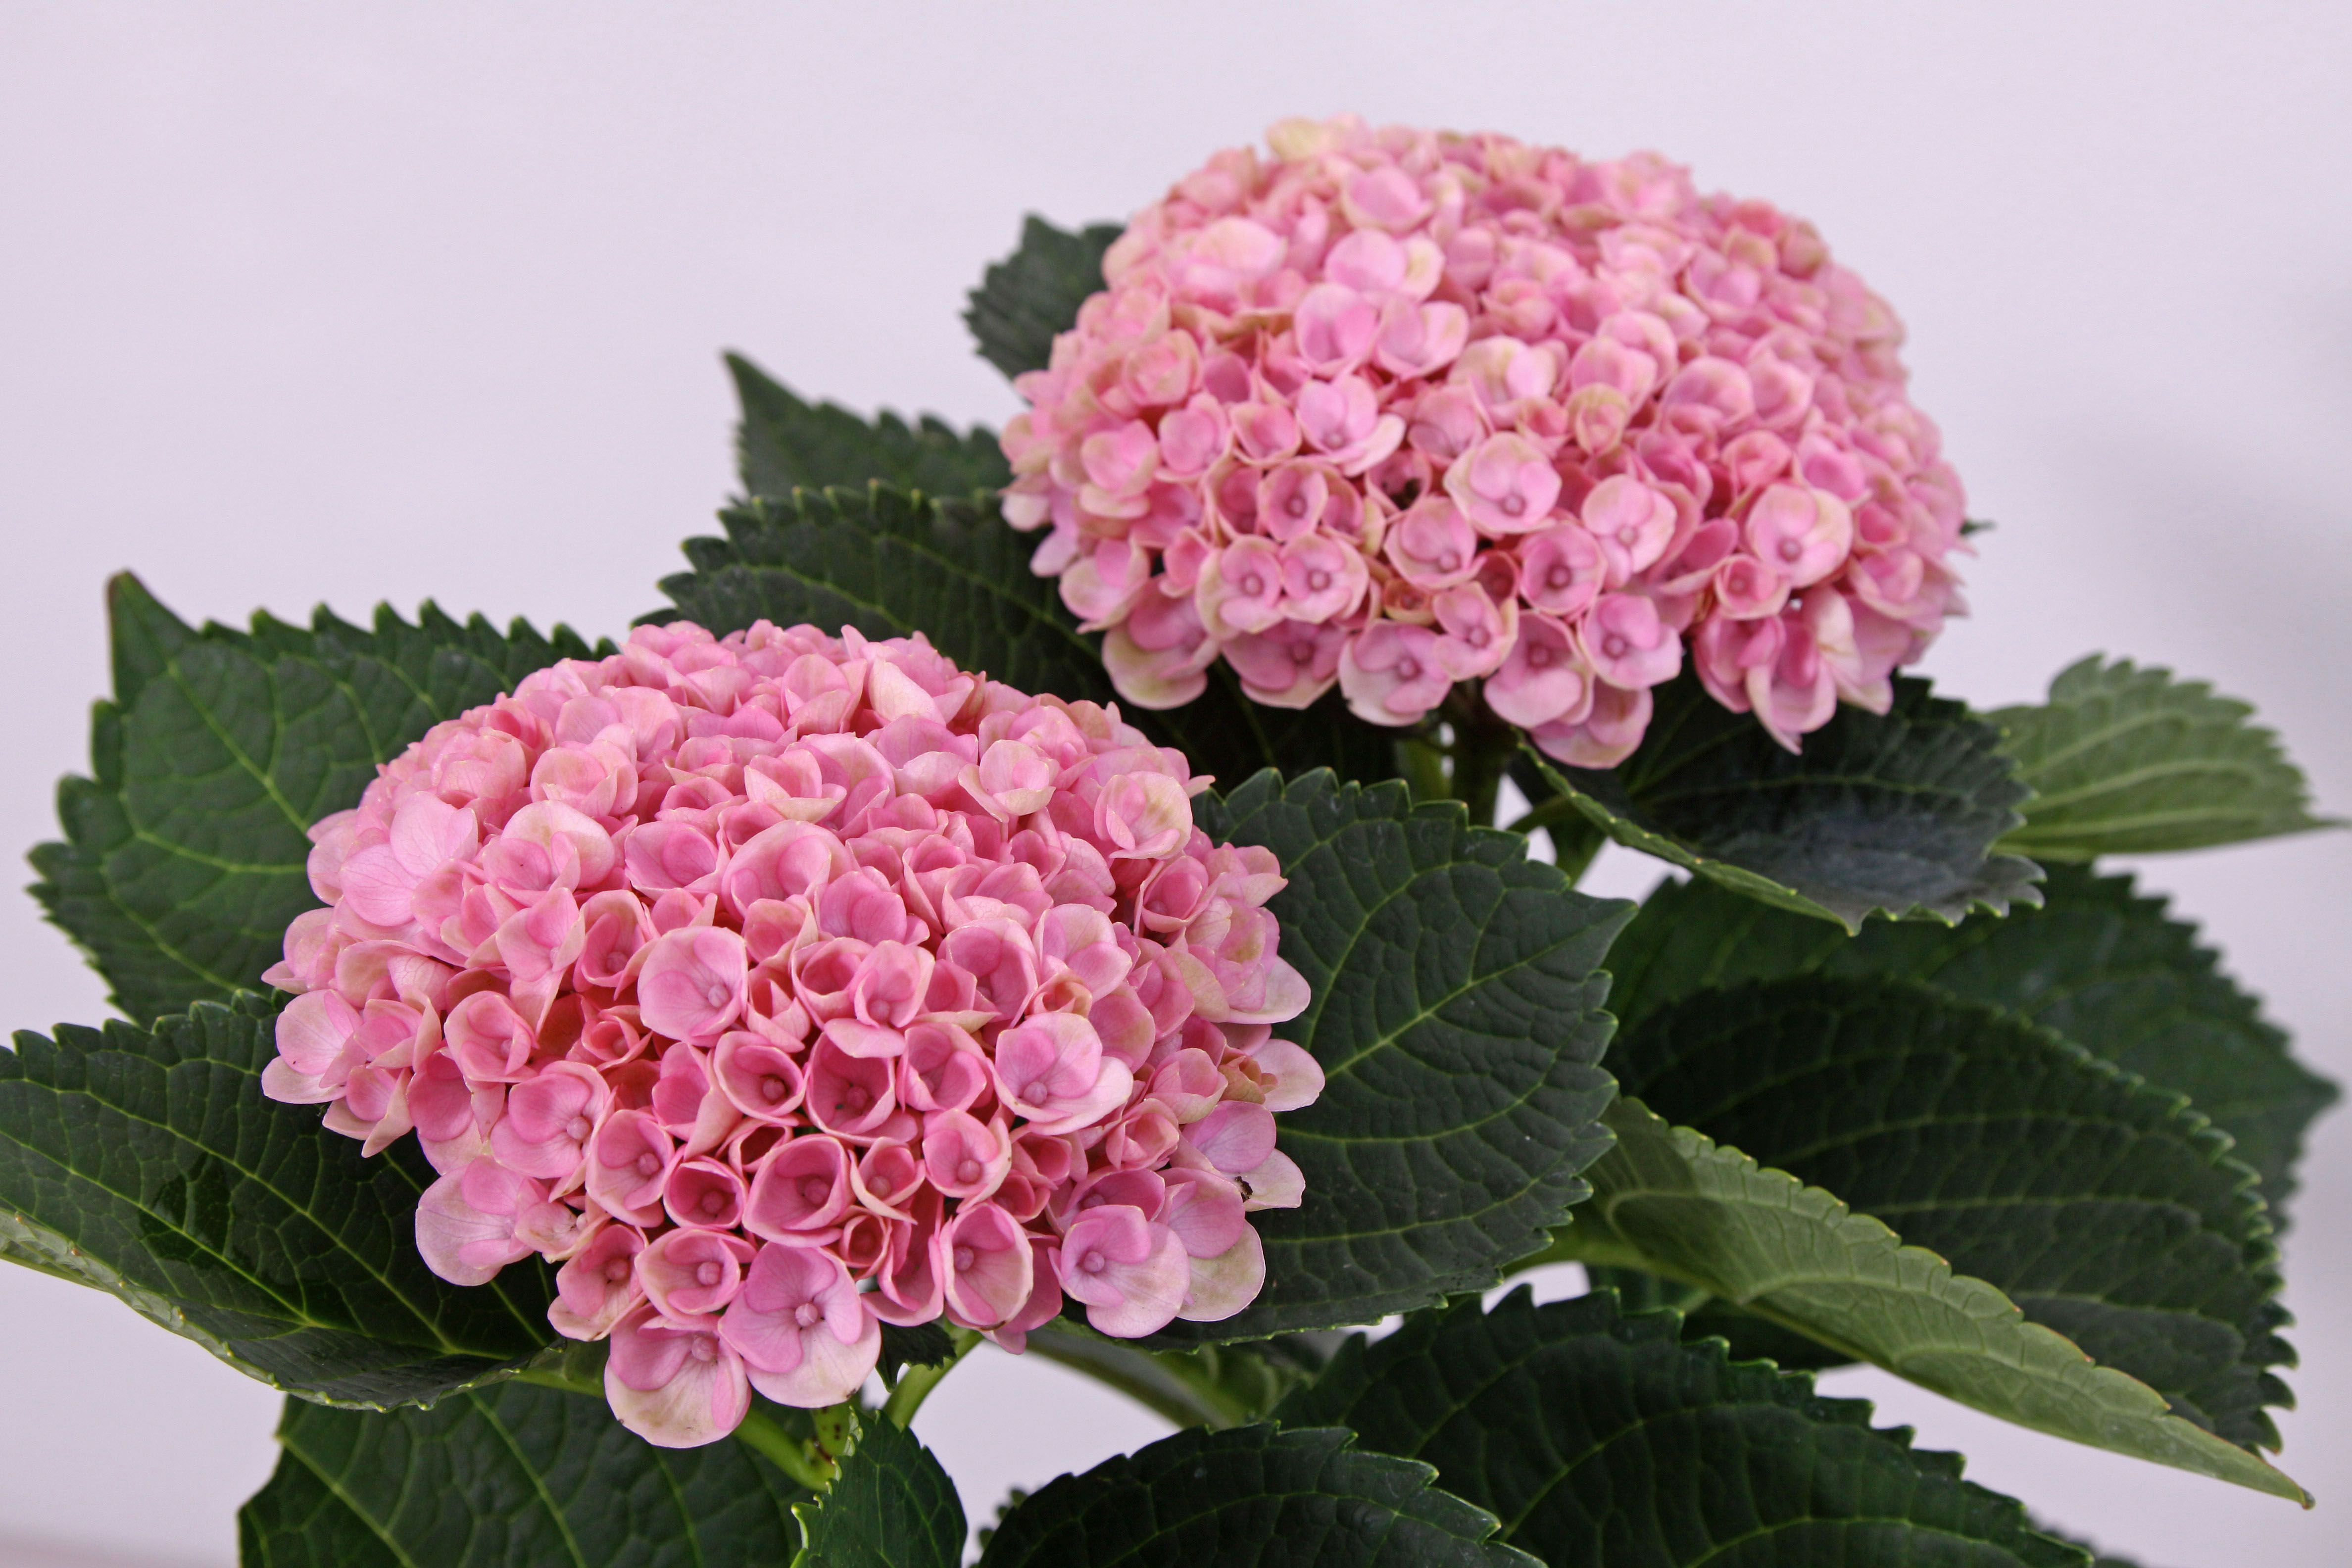 images/plants/hydrangea/hyd-magical-everlasting-revolution/hyd-magical-everlasting-revolution-0091.jpg